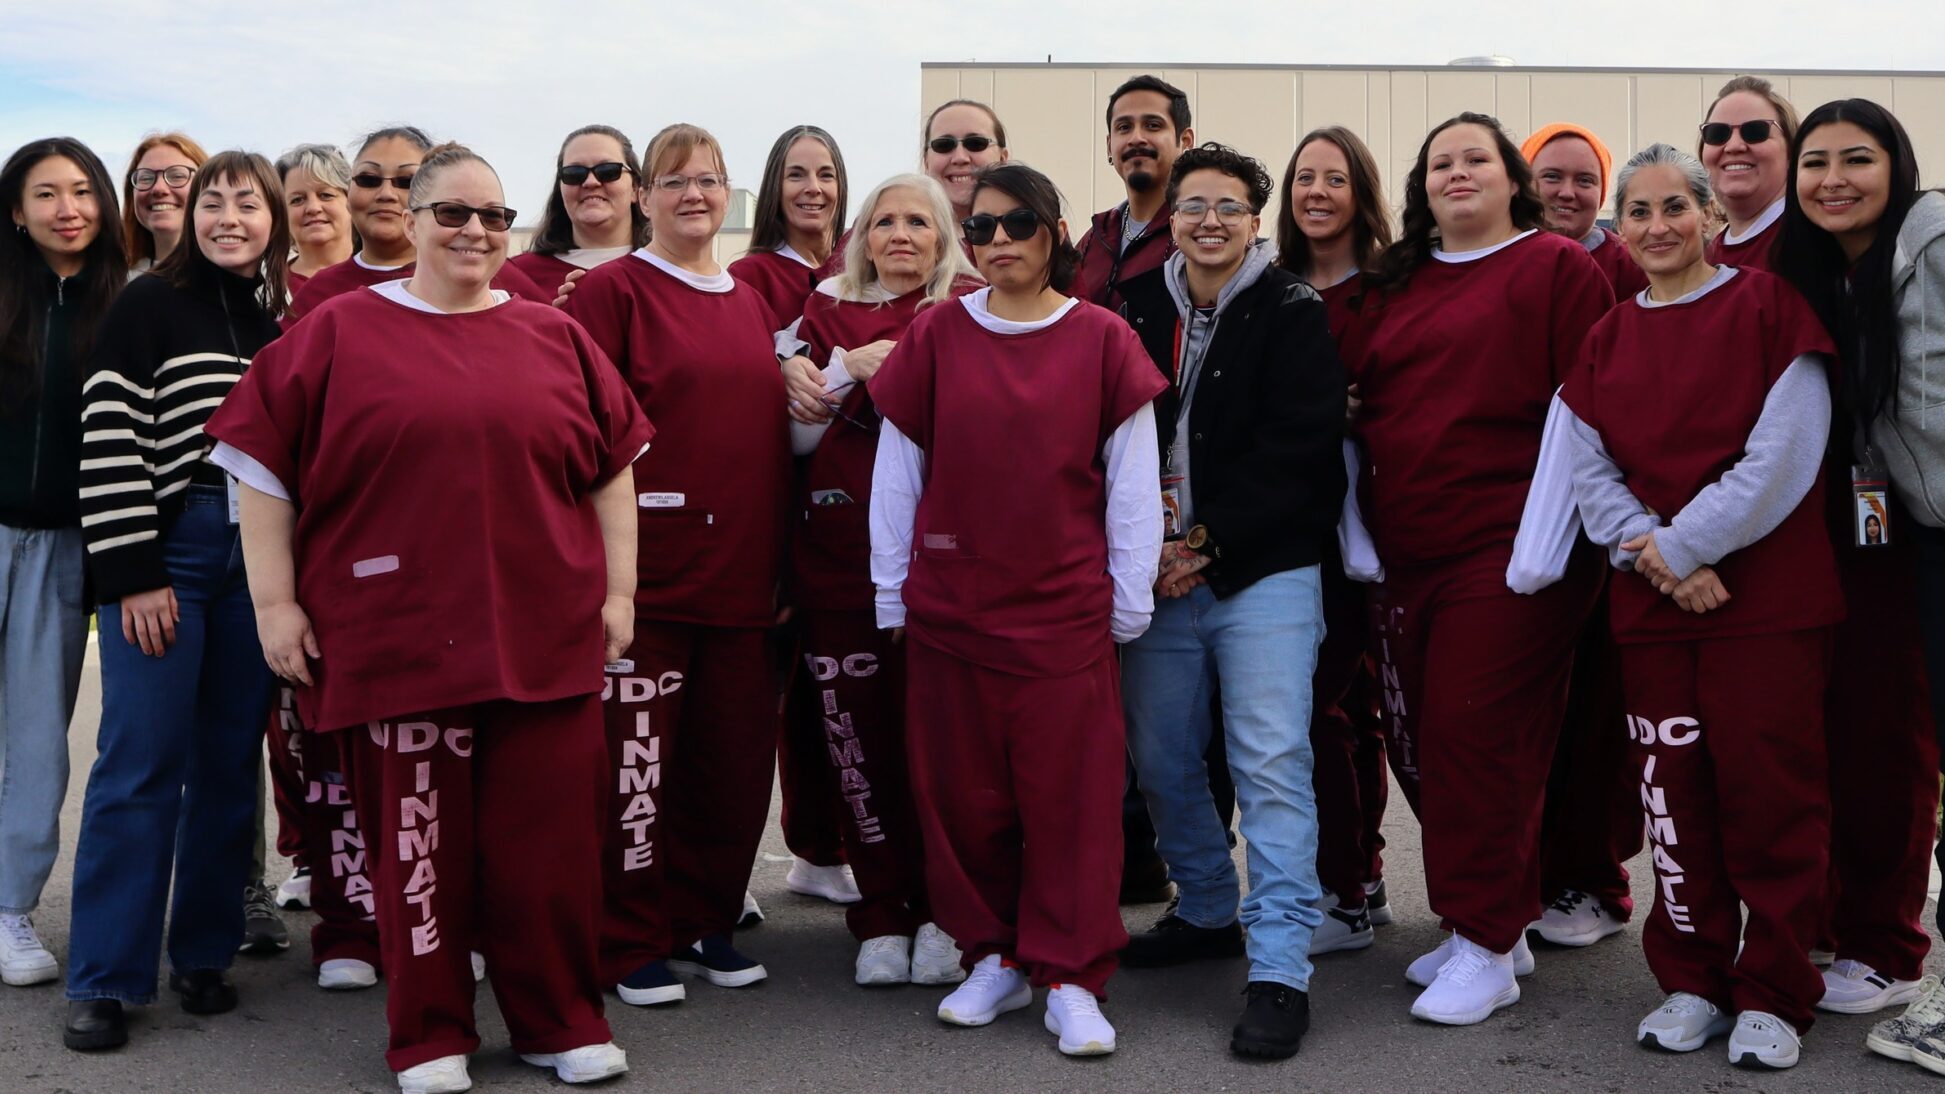 prison education project students pose for a photo at the utah state correctional facility...